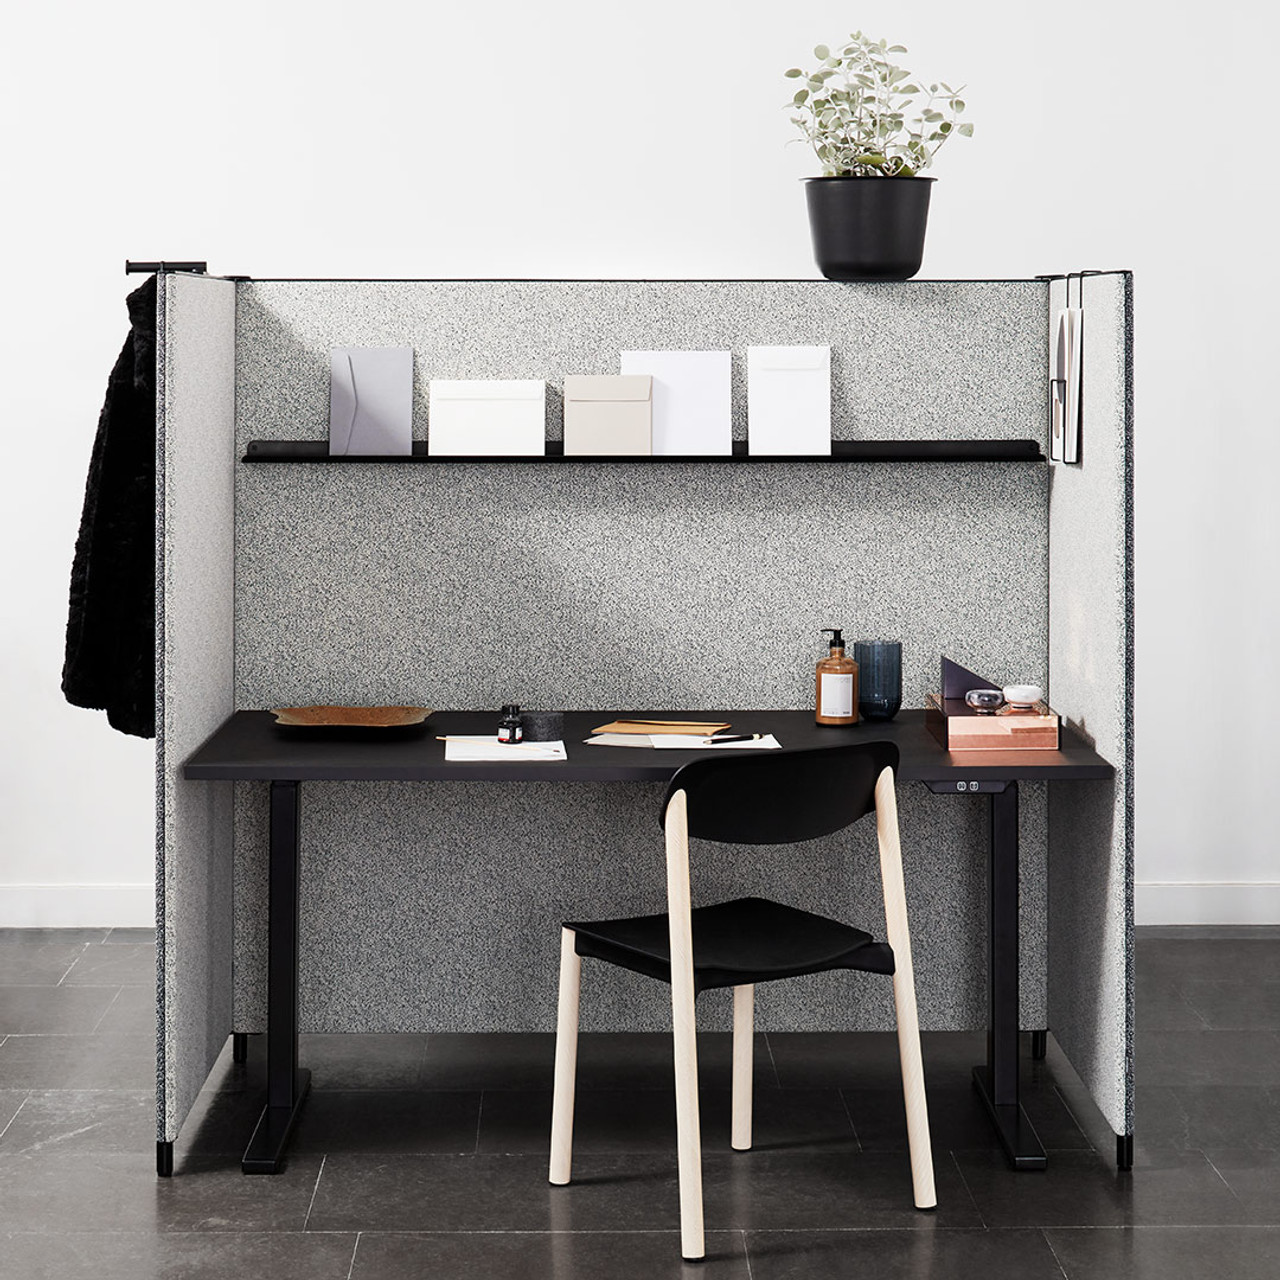 DB H Cubicle Office Workstation | Panelscreens